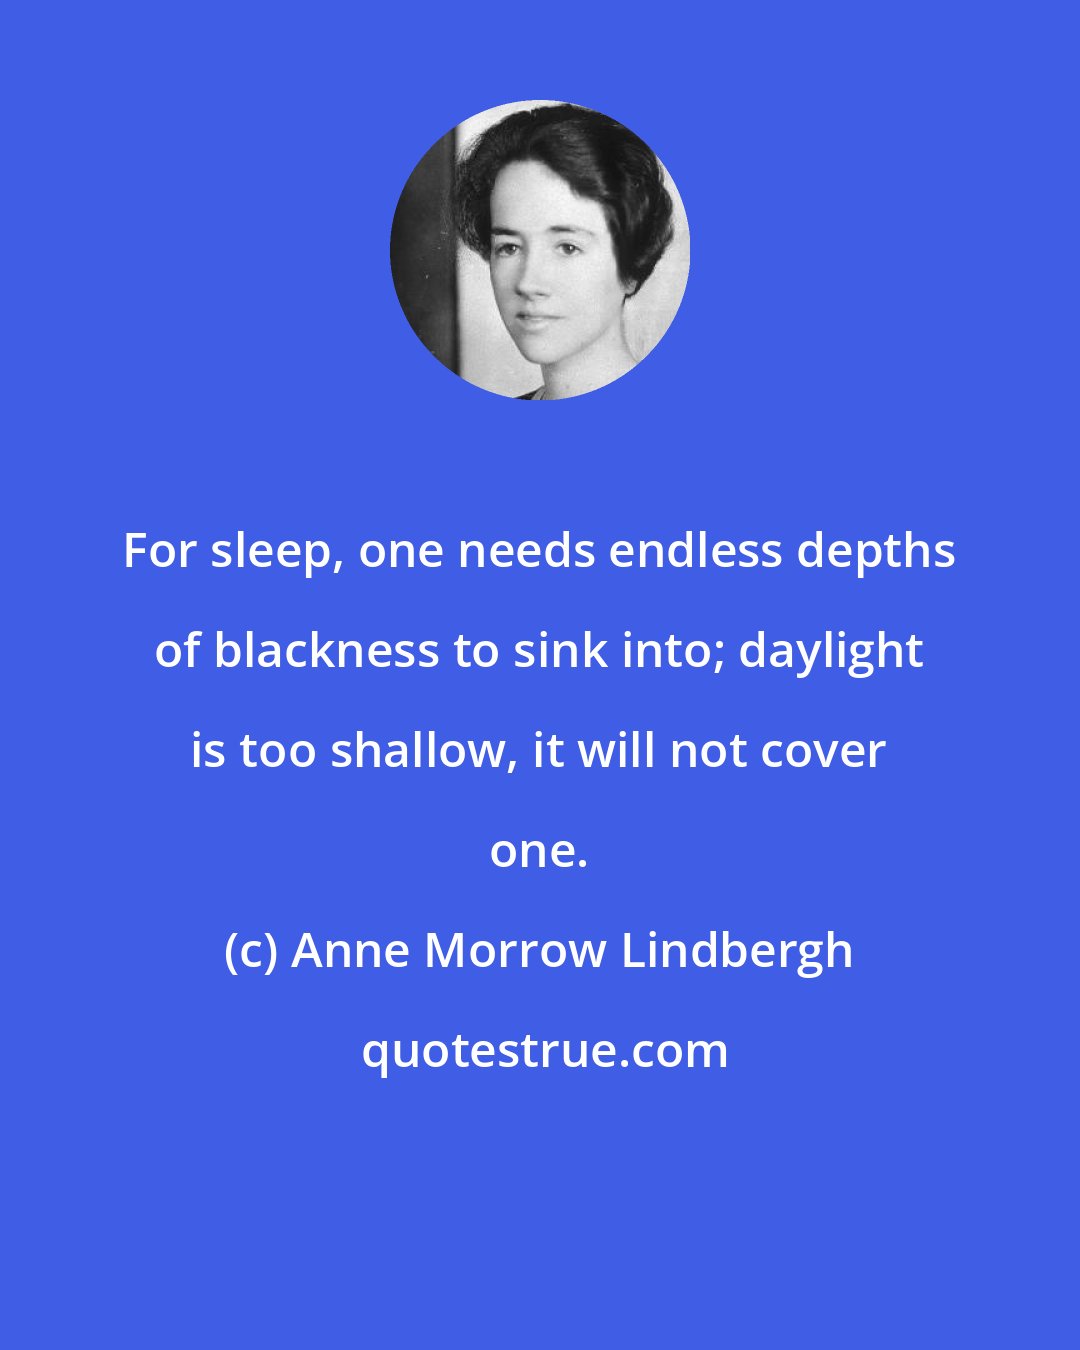 Anne Morrow Lindbergh: For sleep, one needs endless depths of blackness to sink into; daylight is too shallow, it will not cover one.